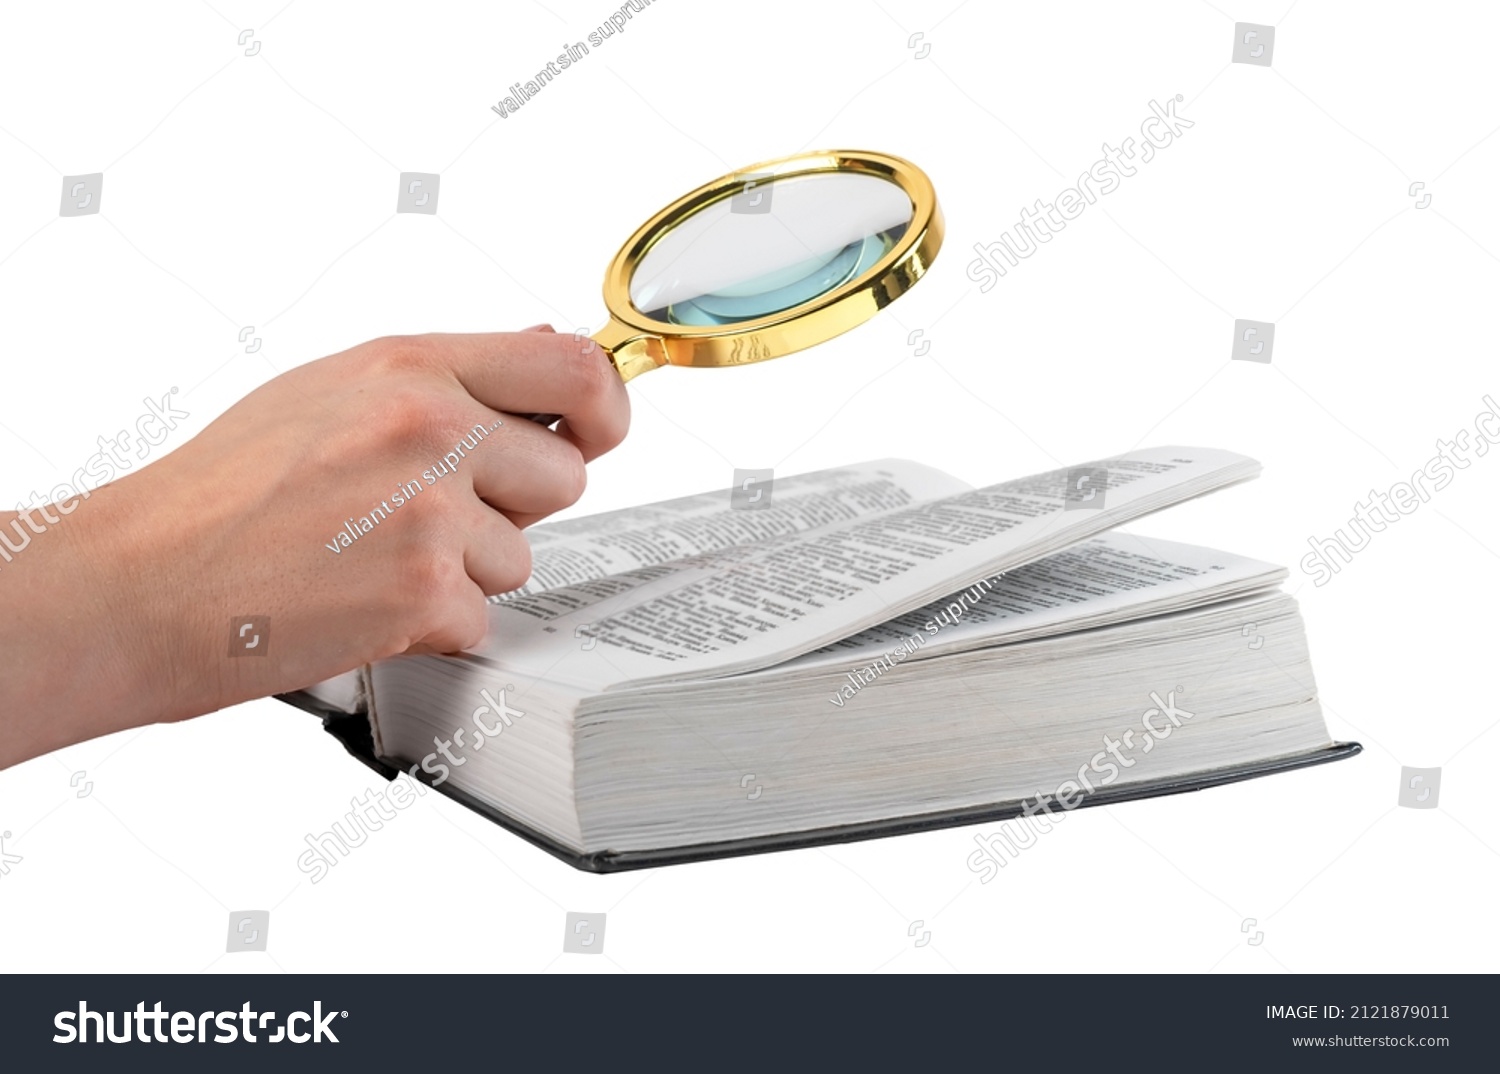 Hand holding magnifying glass for reading book isolated on white background. Relevant information search, study concept. High quality photo #2121879011